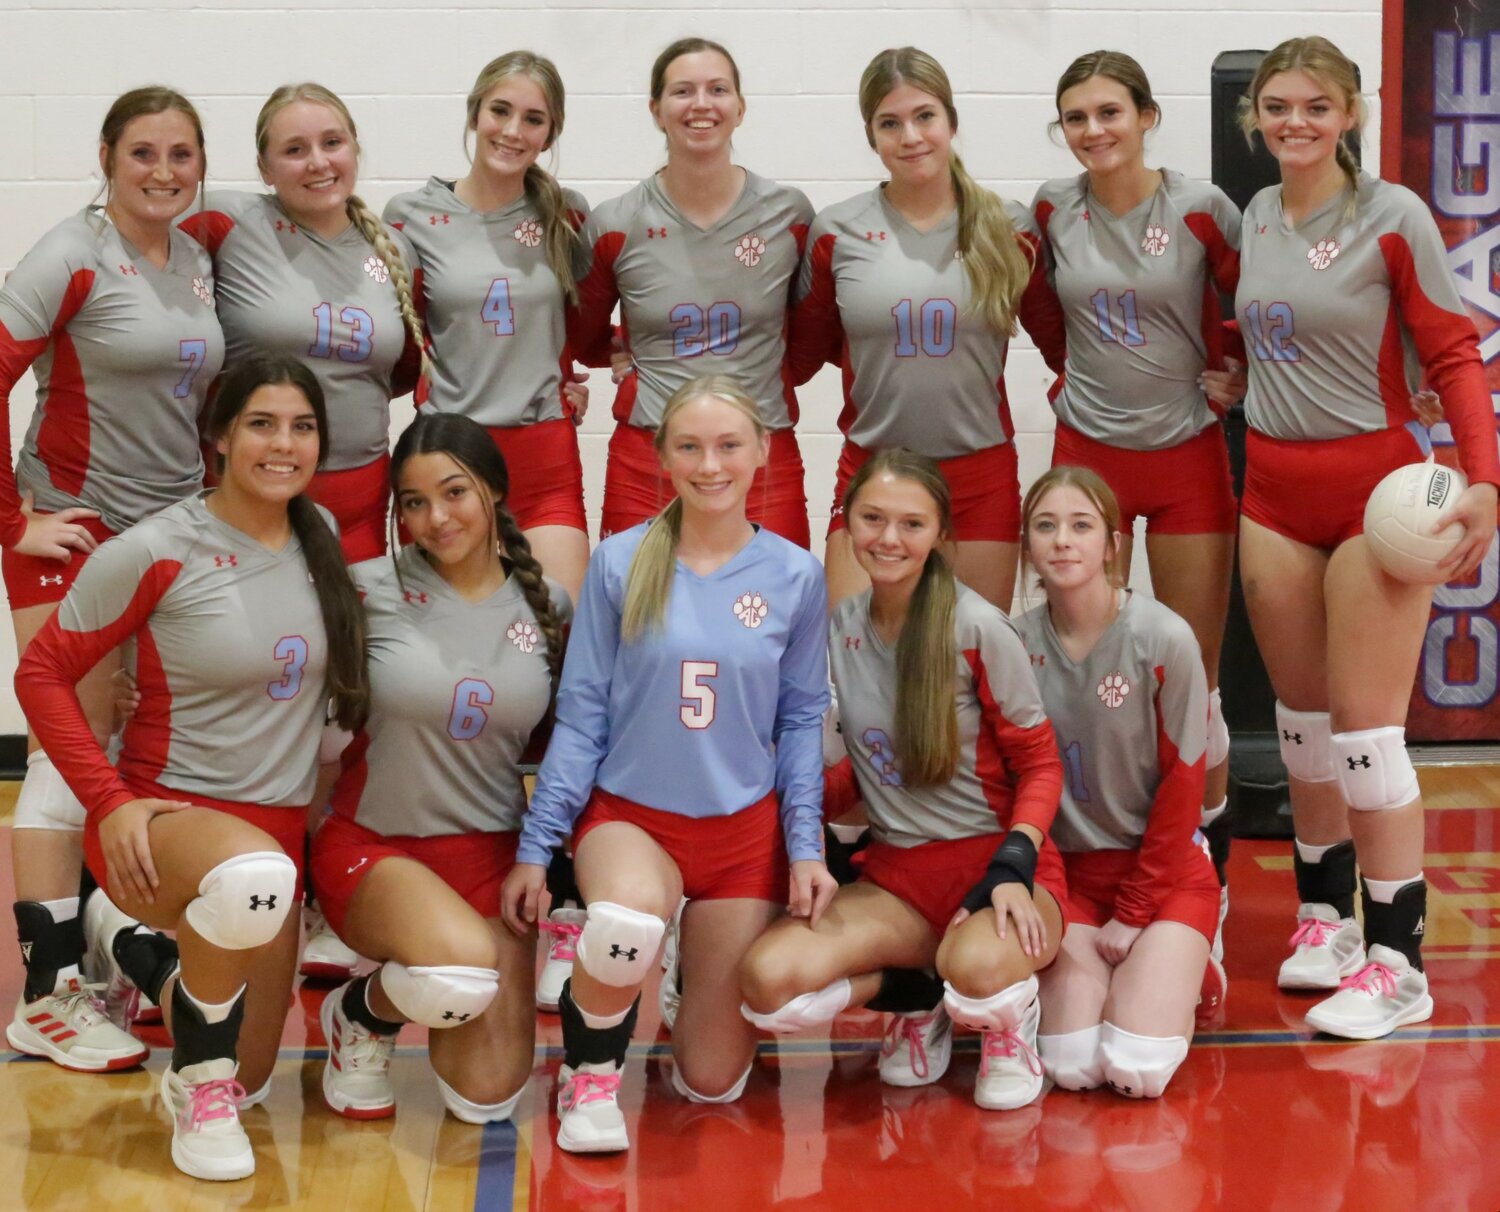 The varsity Lady Panthers Alba-Golden volleyball team, back from left, Megan Wallace, Kirsty Jackson-Colgrove, Lainey Wright, Hailey Crutchfield, Lainey Teel, Bailee Bishop and Alexis Wilmut; and, front, Erin Langston, Piper Hallman, Alyssa Murdock, Kalli Trimble and Kirstin Fish.